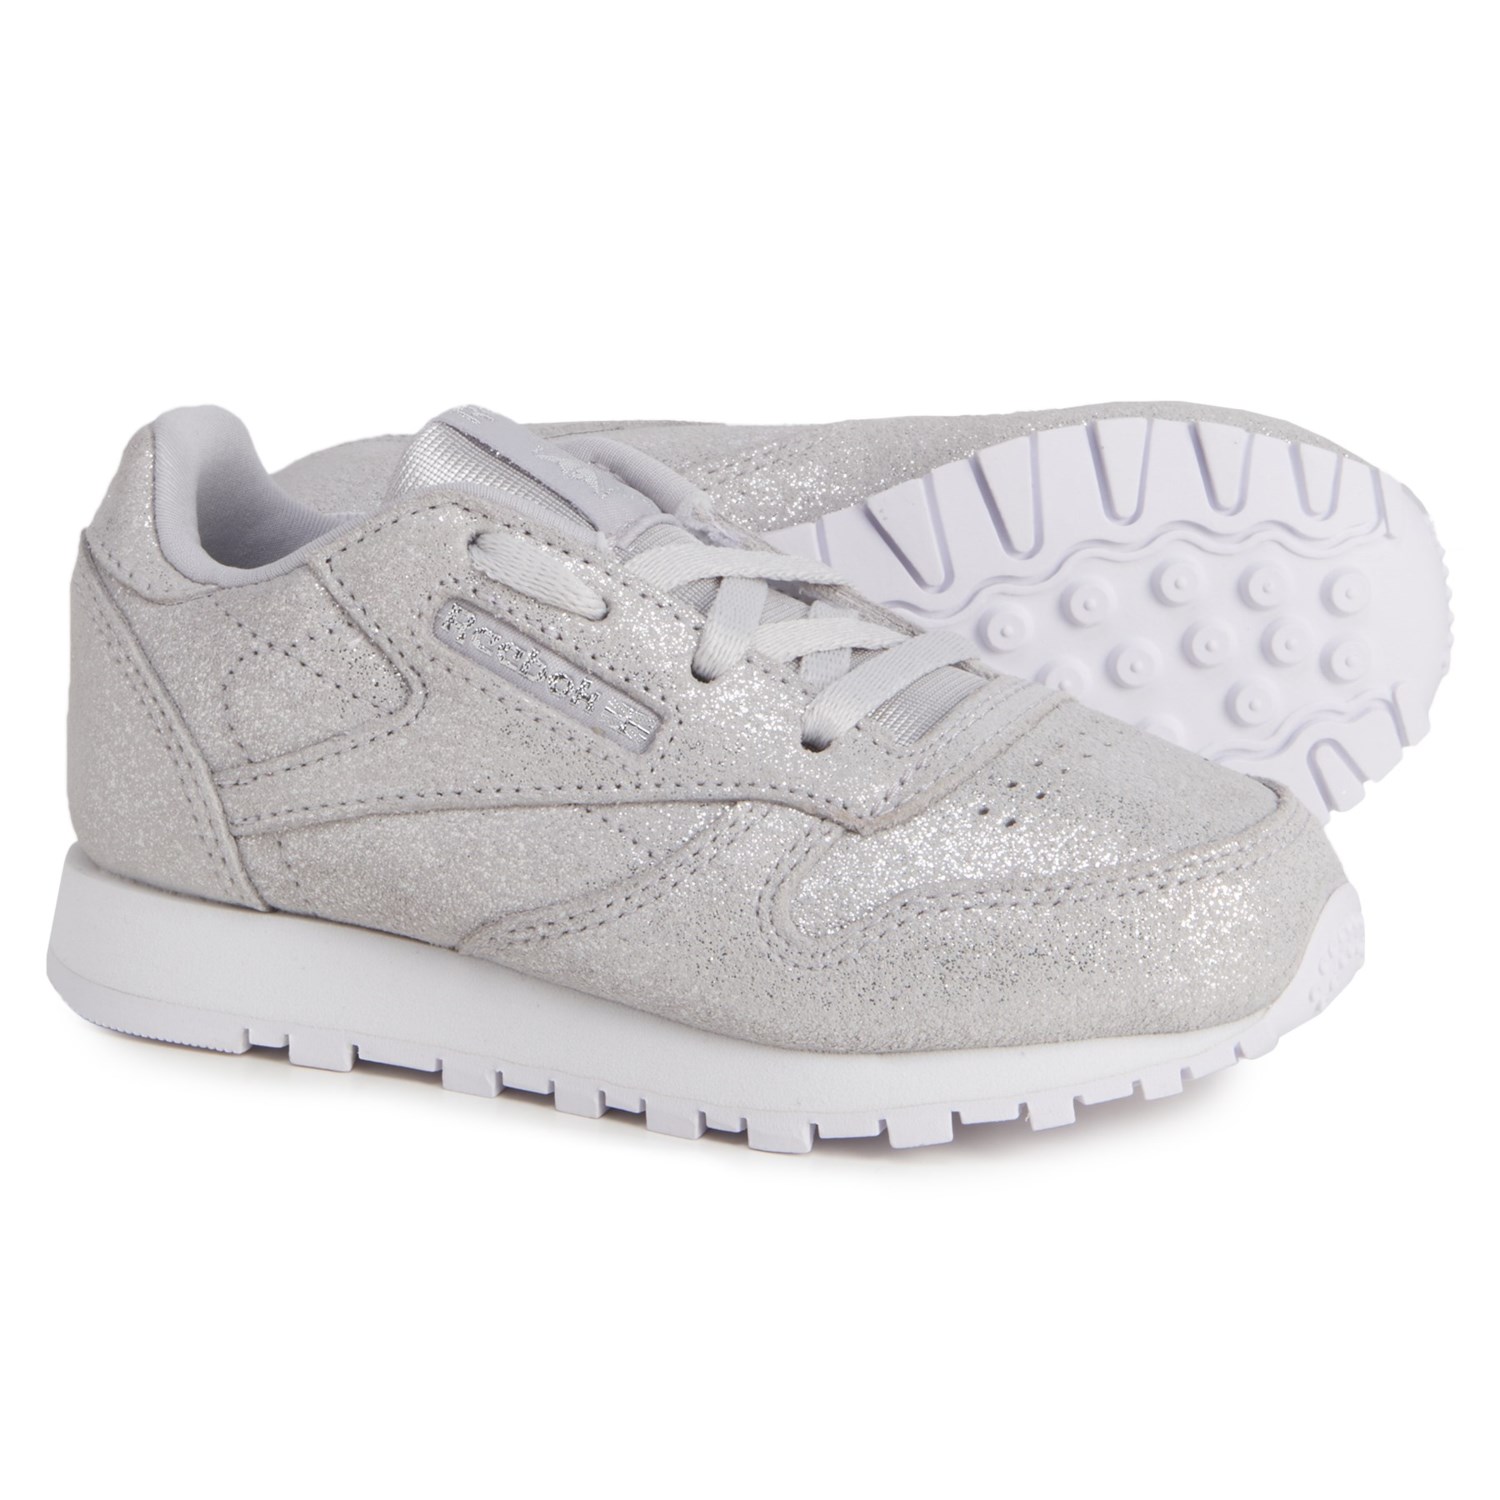 Reebok Classic Leather Shoes (For Girls) - Save 37%